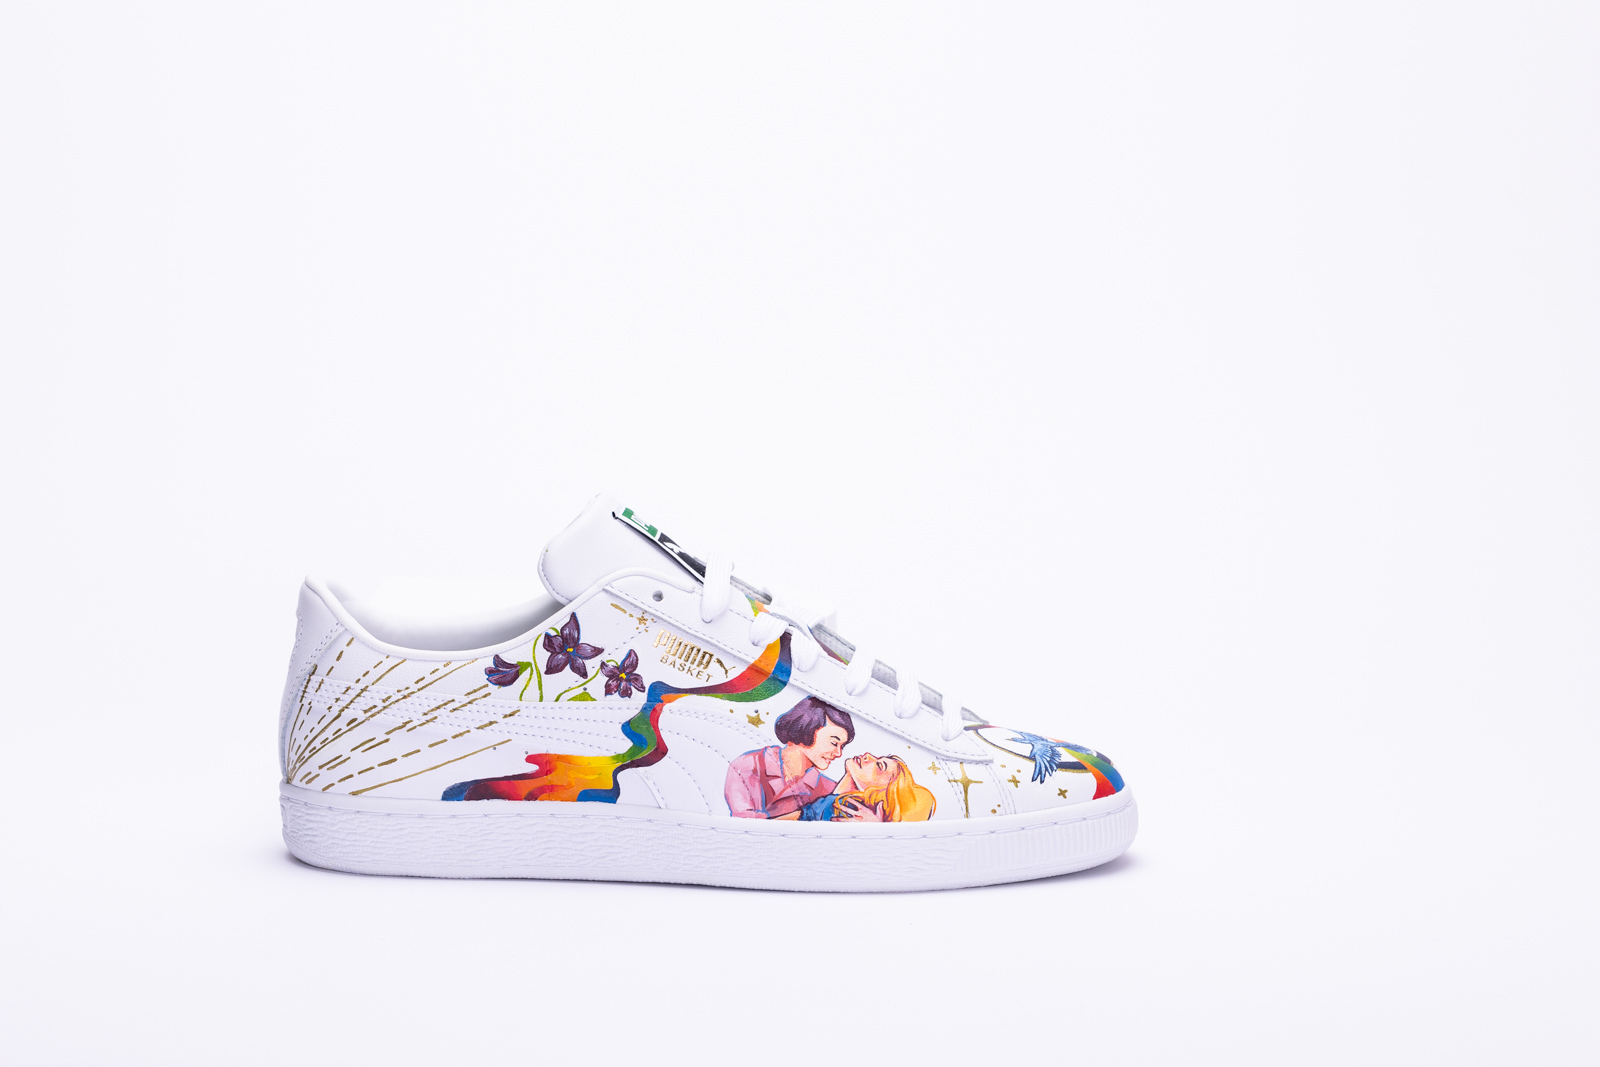 Sneaker designed by Mallory Bell